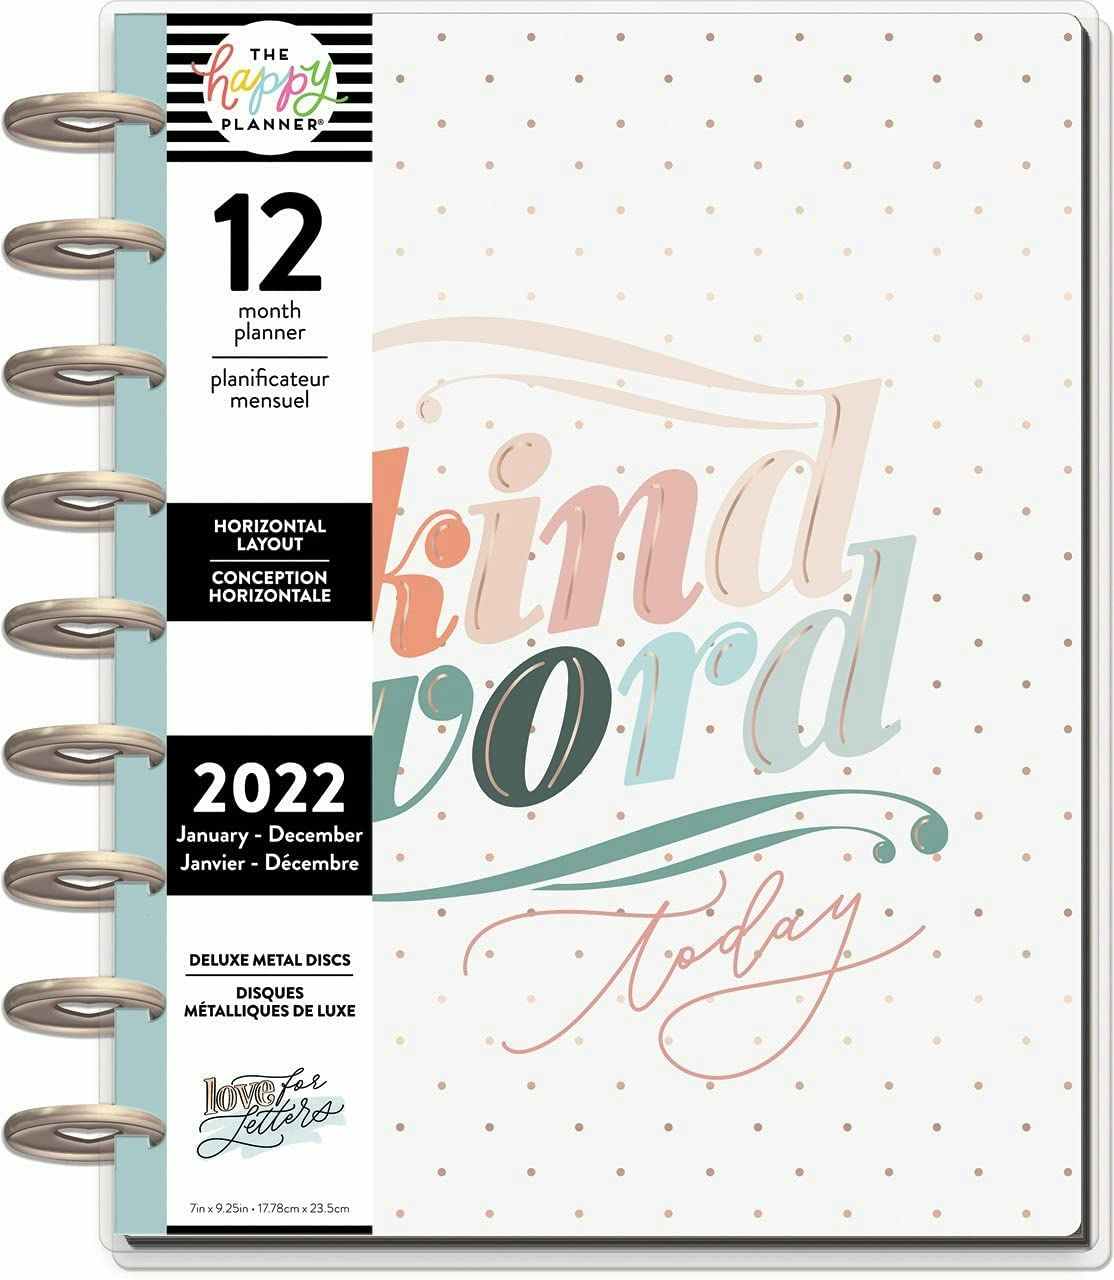 The love for letters themed planner.